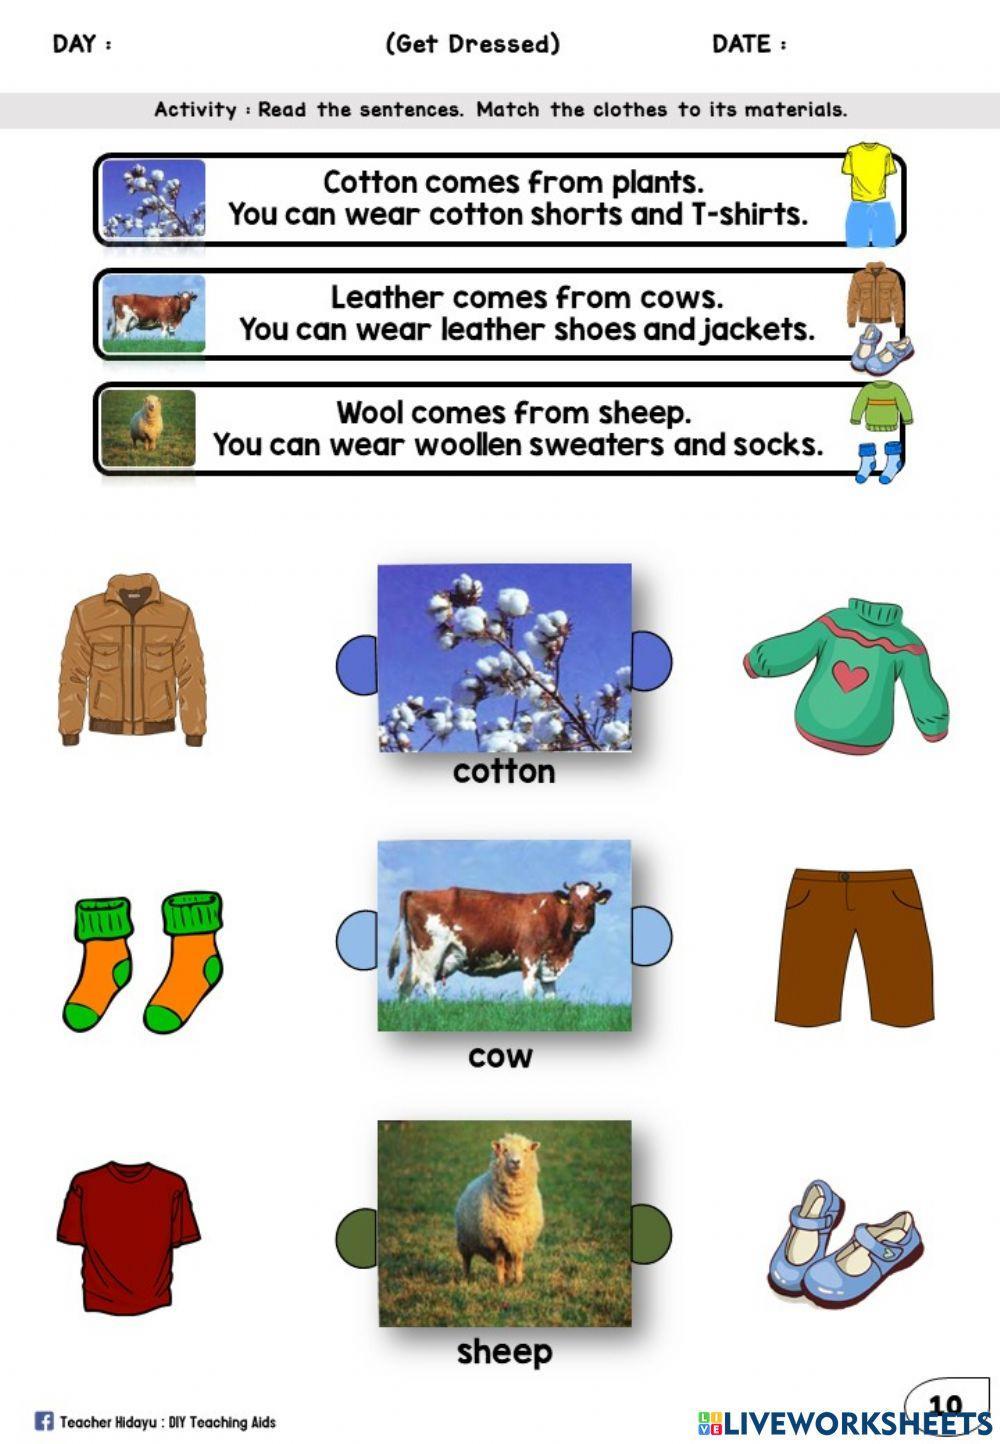 Get Dressed Year 2 (Look, read and match)